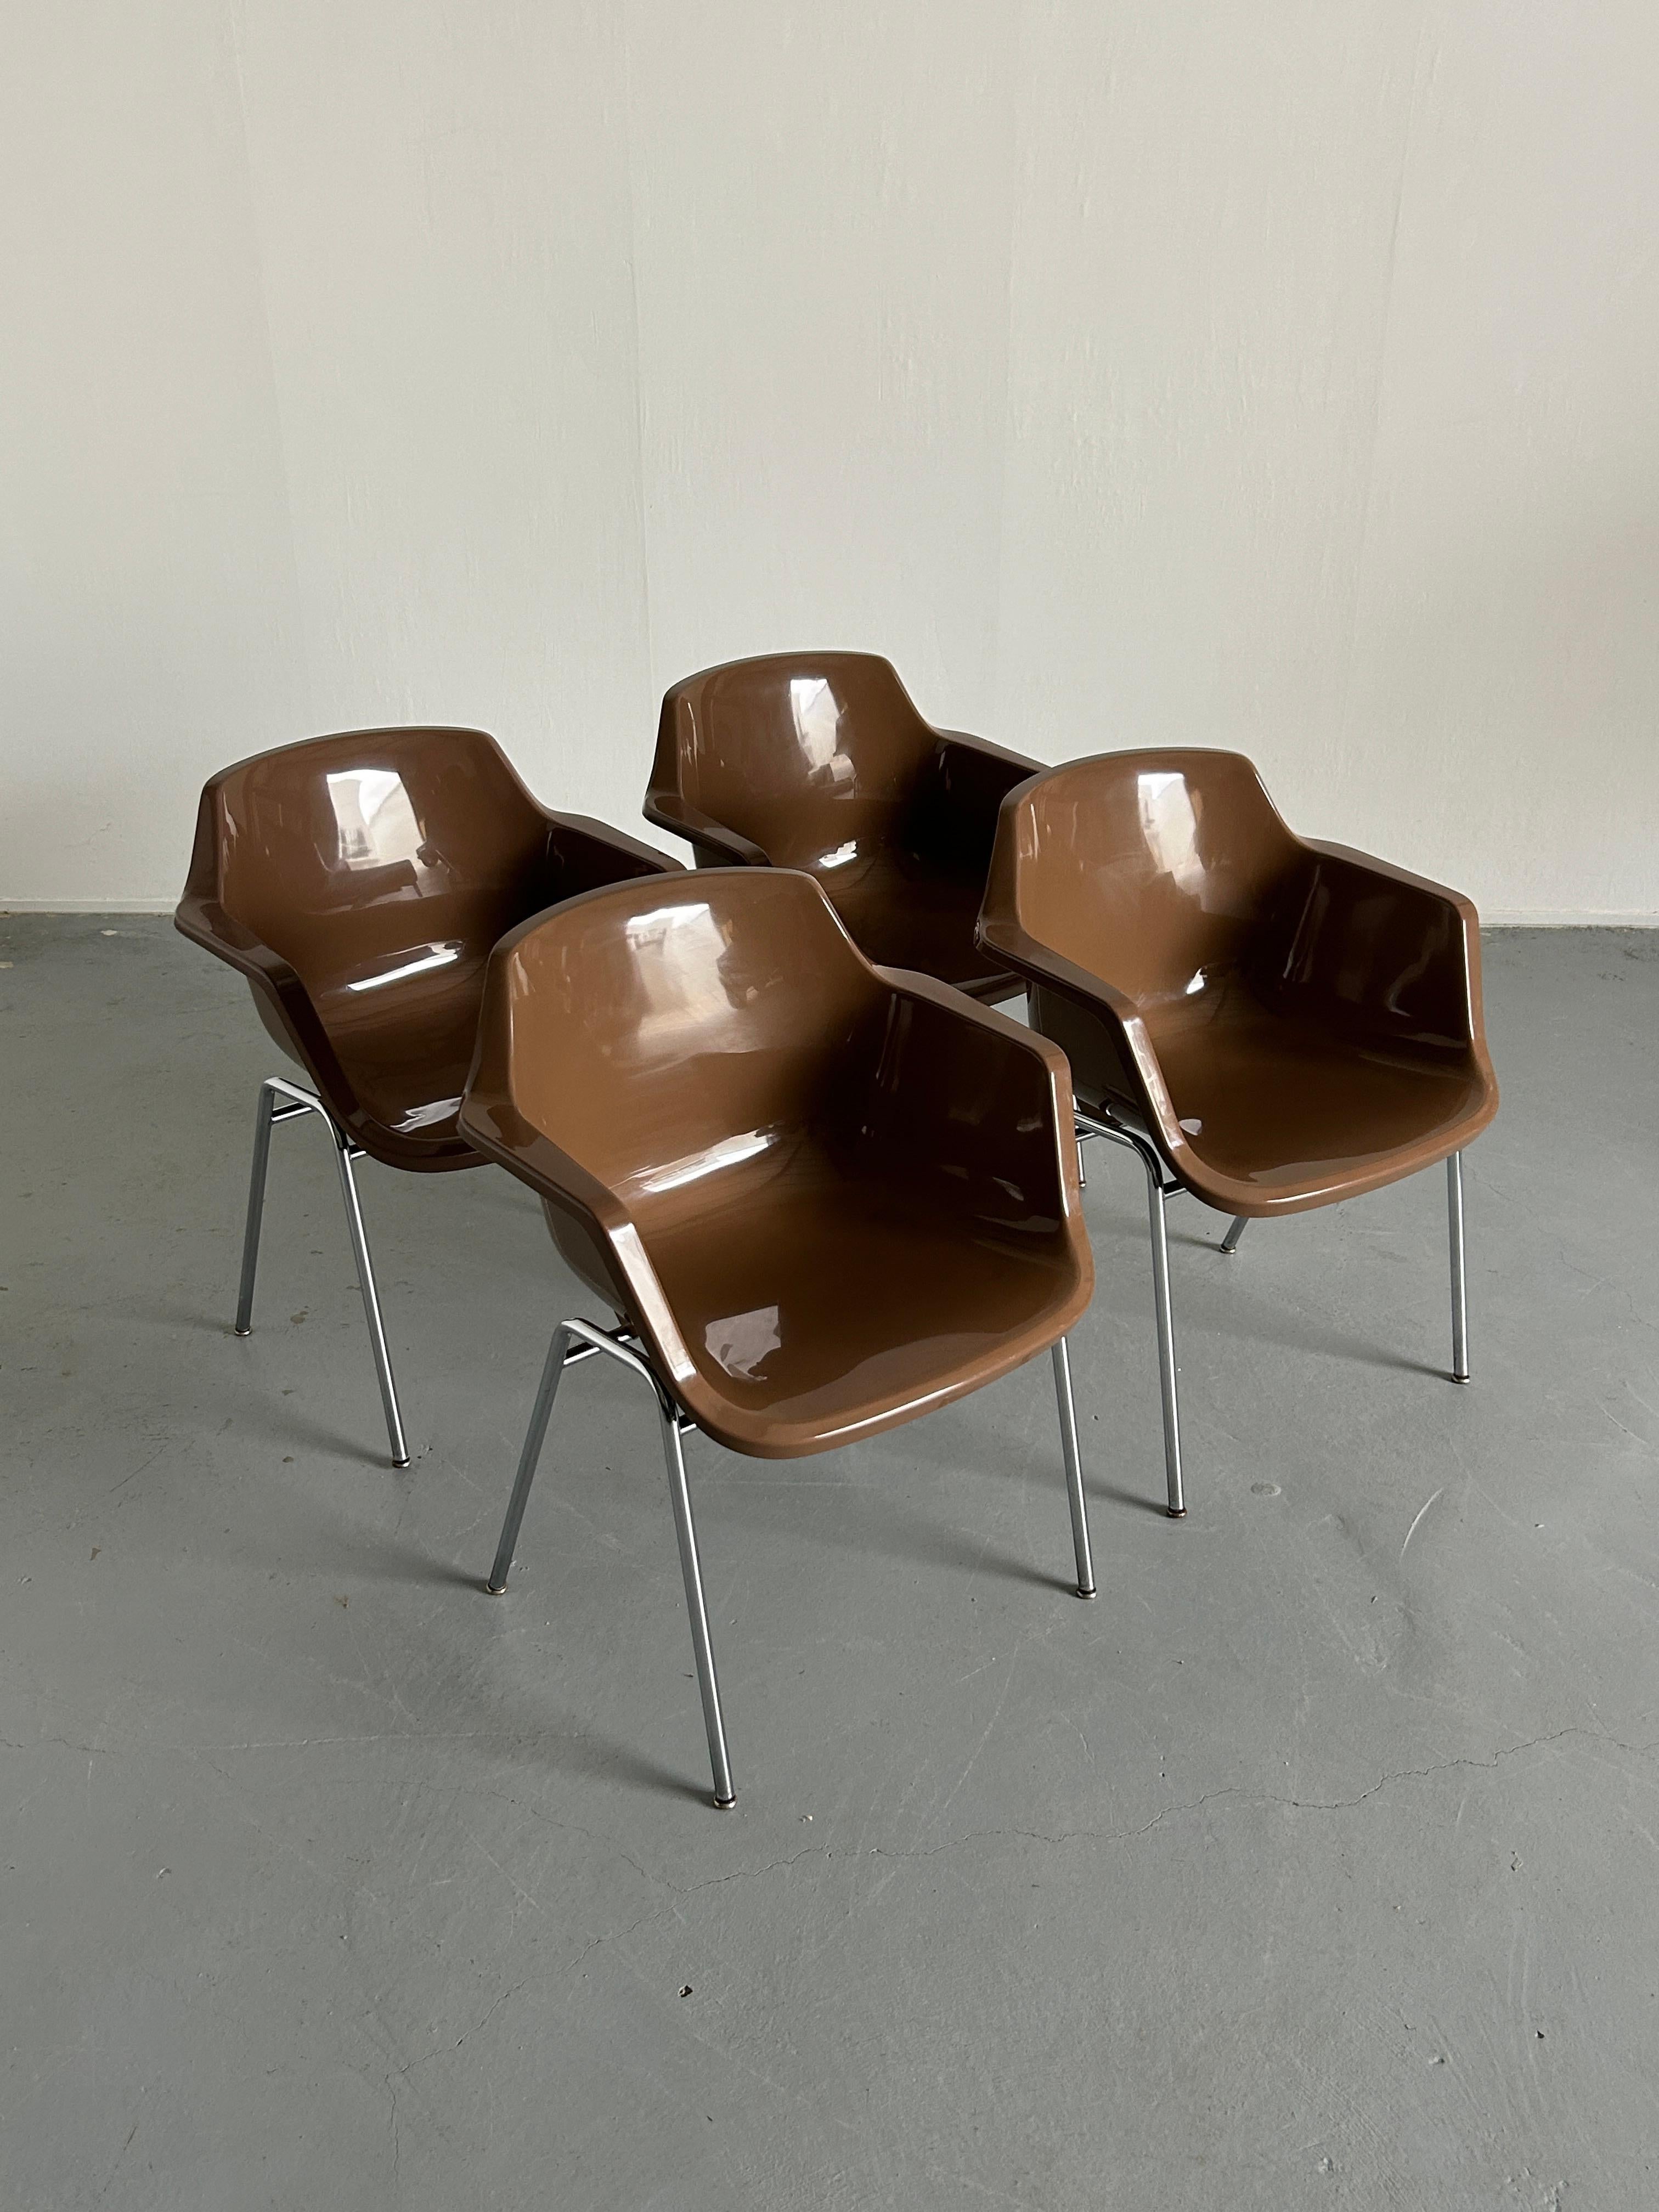 1 of 4 Vintage Mid-Century Shell Plastic Dining Chairs in style of Eames Shell  For Sale 1